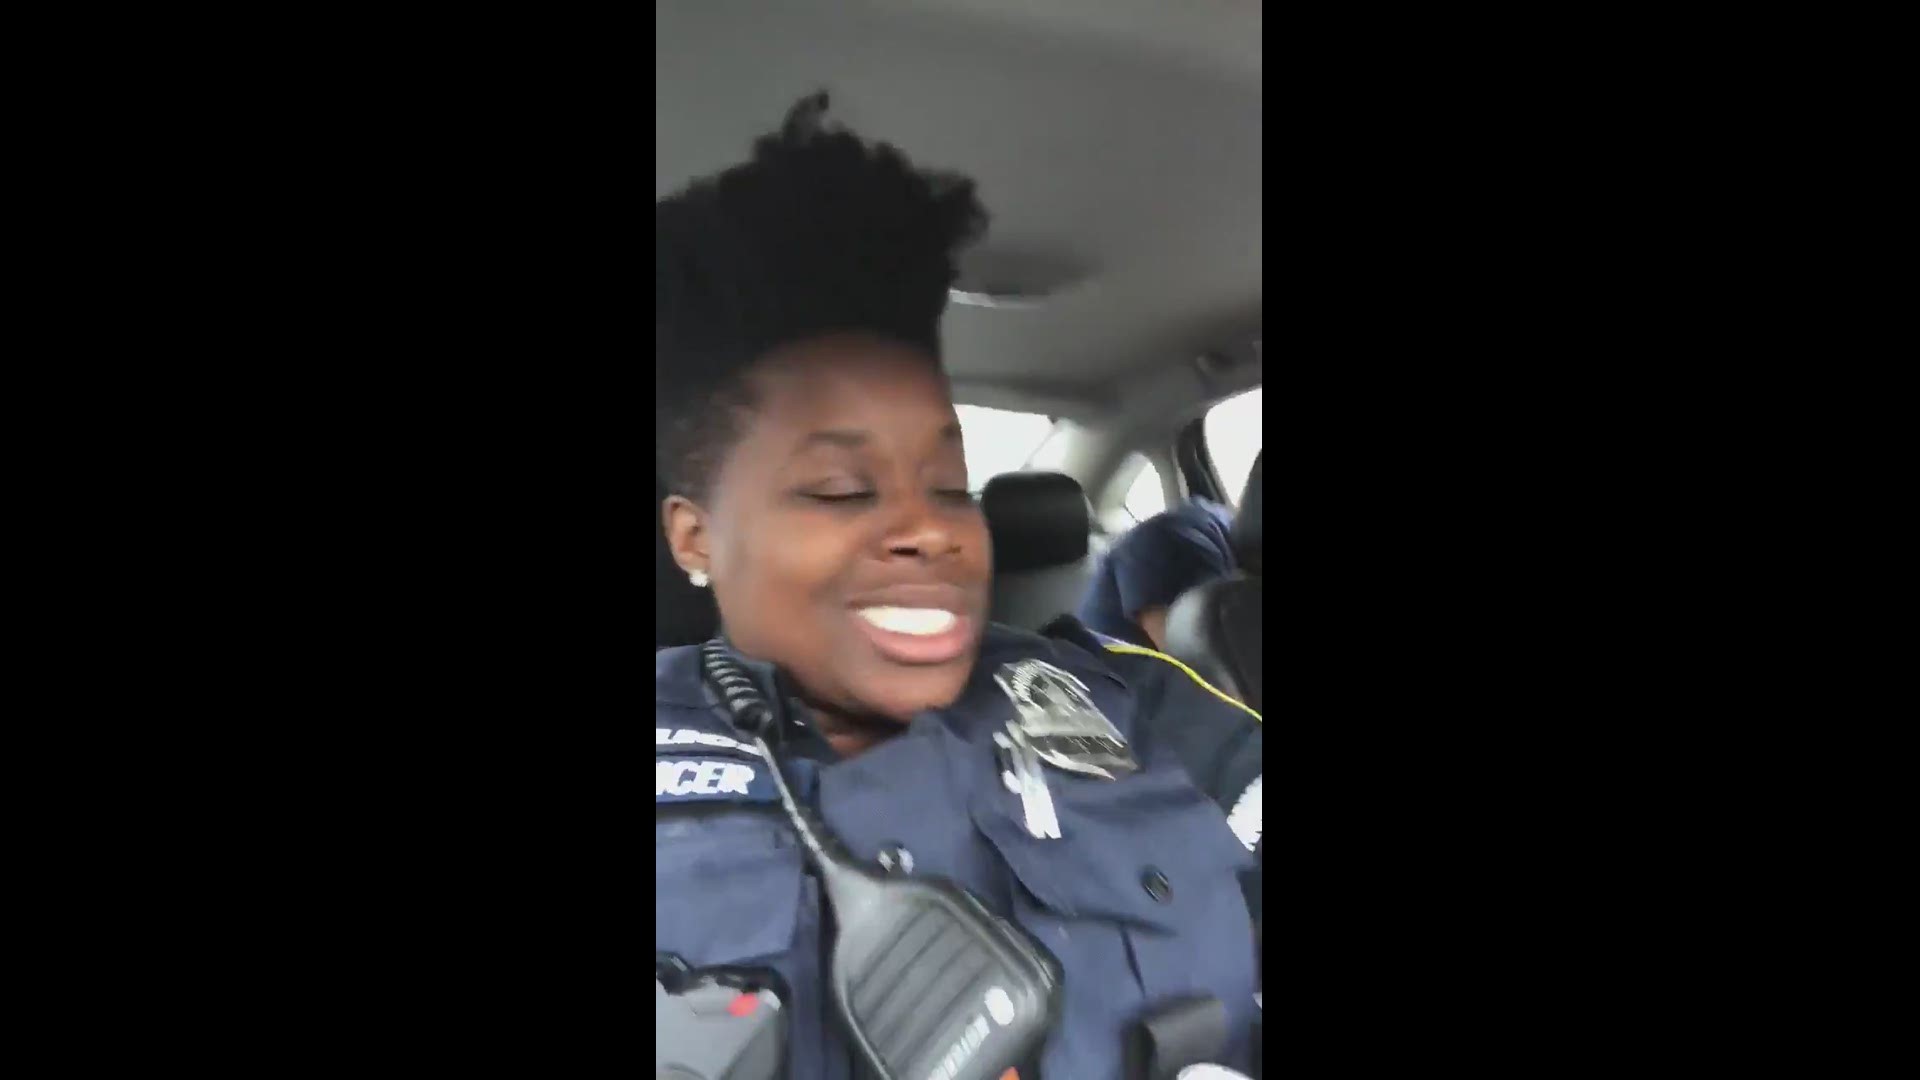 D.C. police officers, challenged by Chicago police as part of "#OperationPayItForward," surprised a mother with with free groceries. Video courtesy of Metropolitan Police Department.